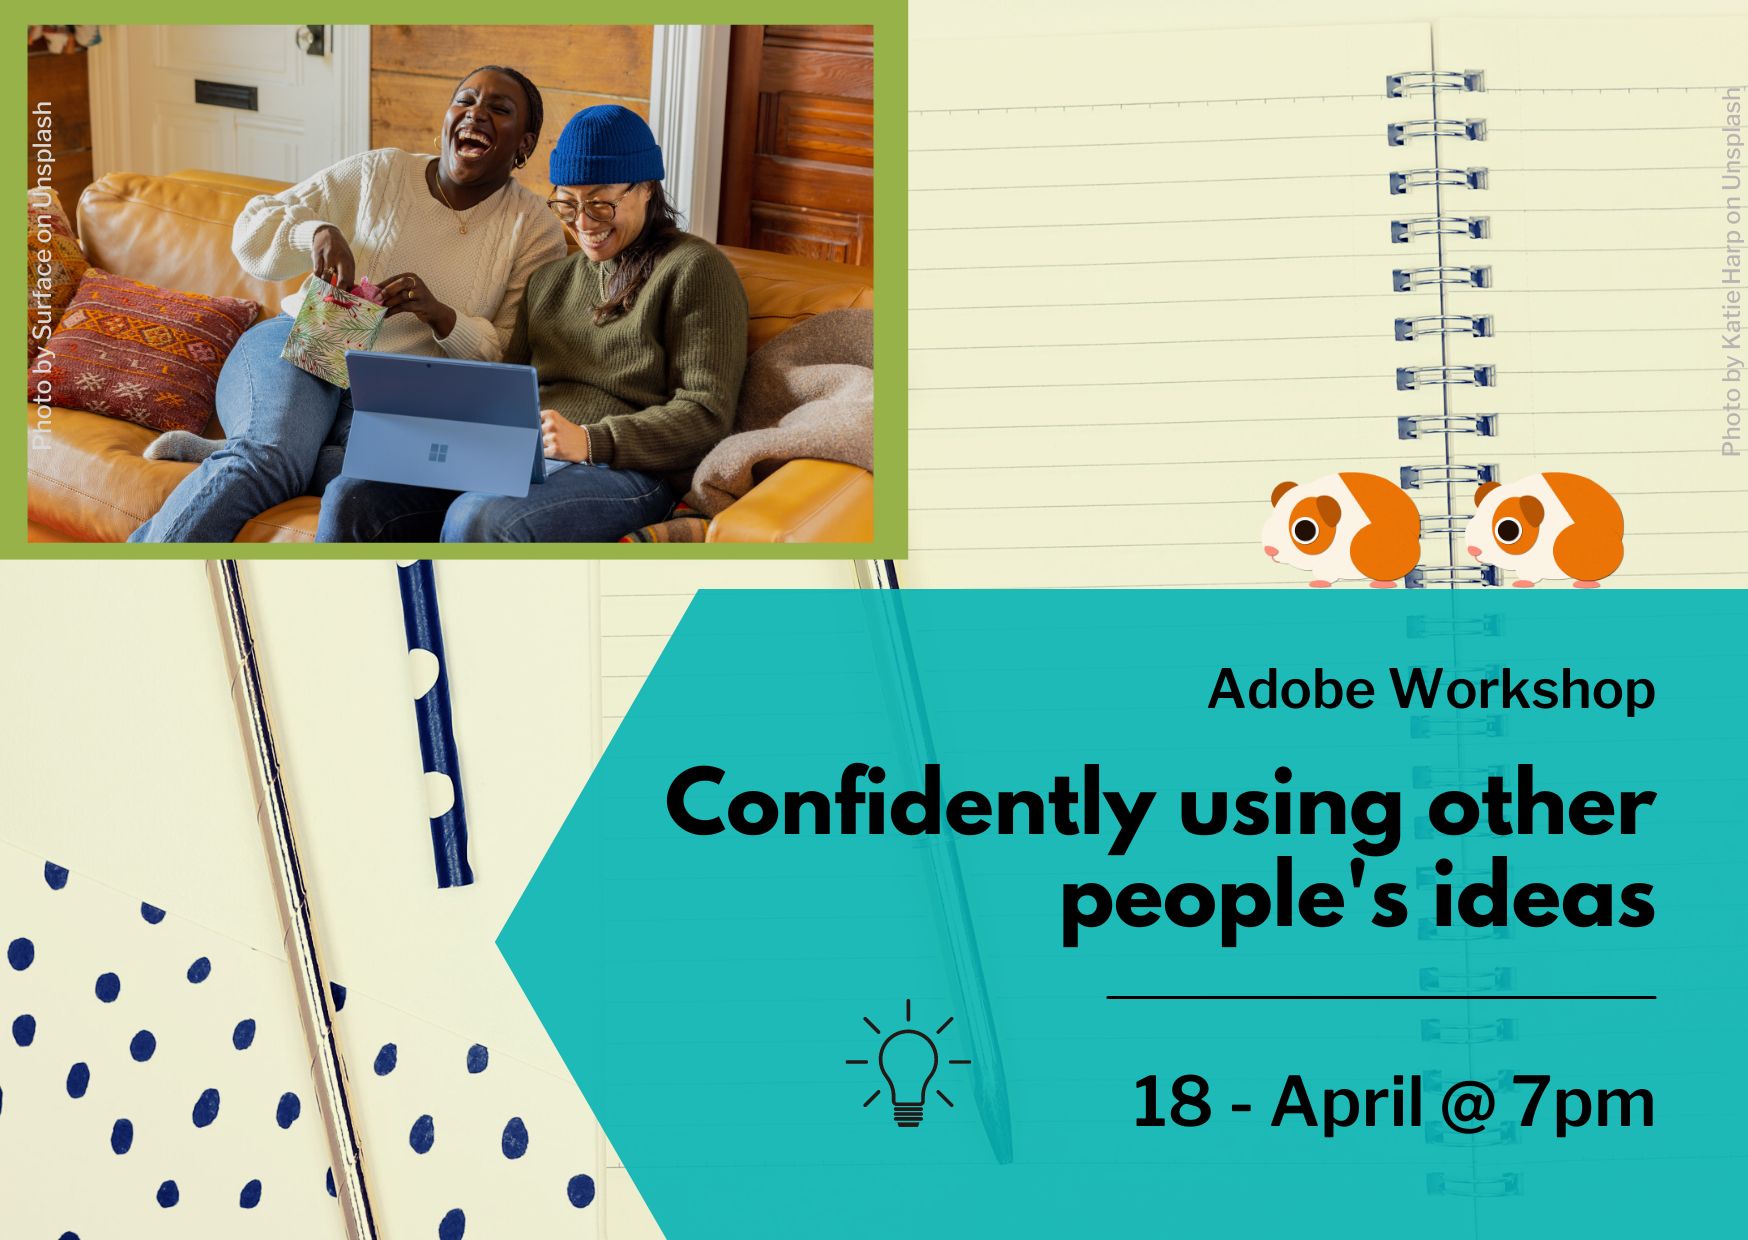 Event image (decorative) and event title 'Confidently using other people's ideas'/ date 18th April 7pm